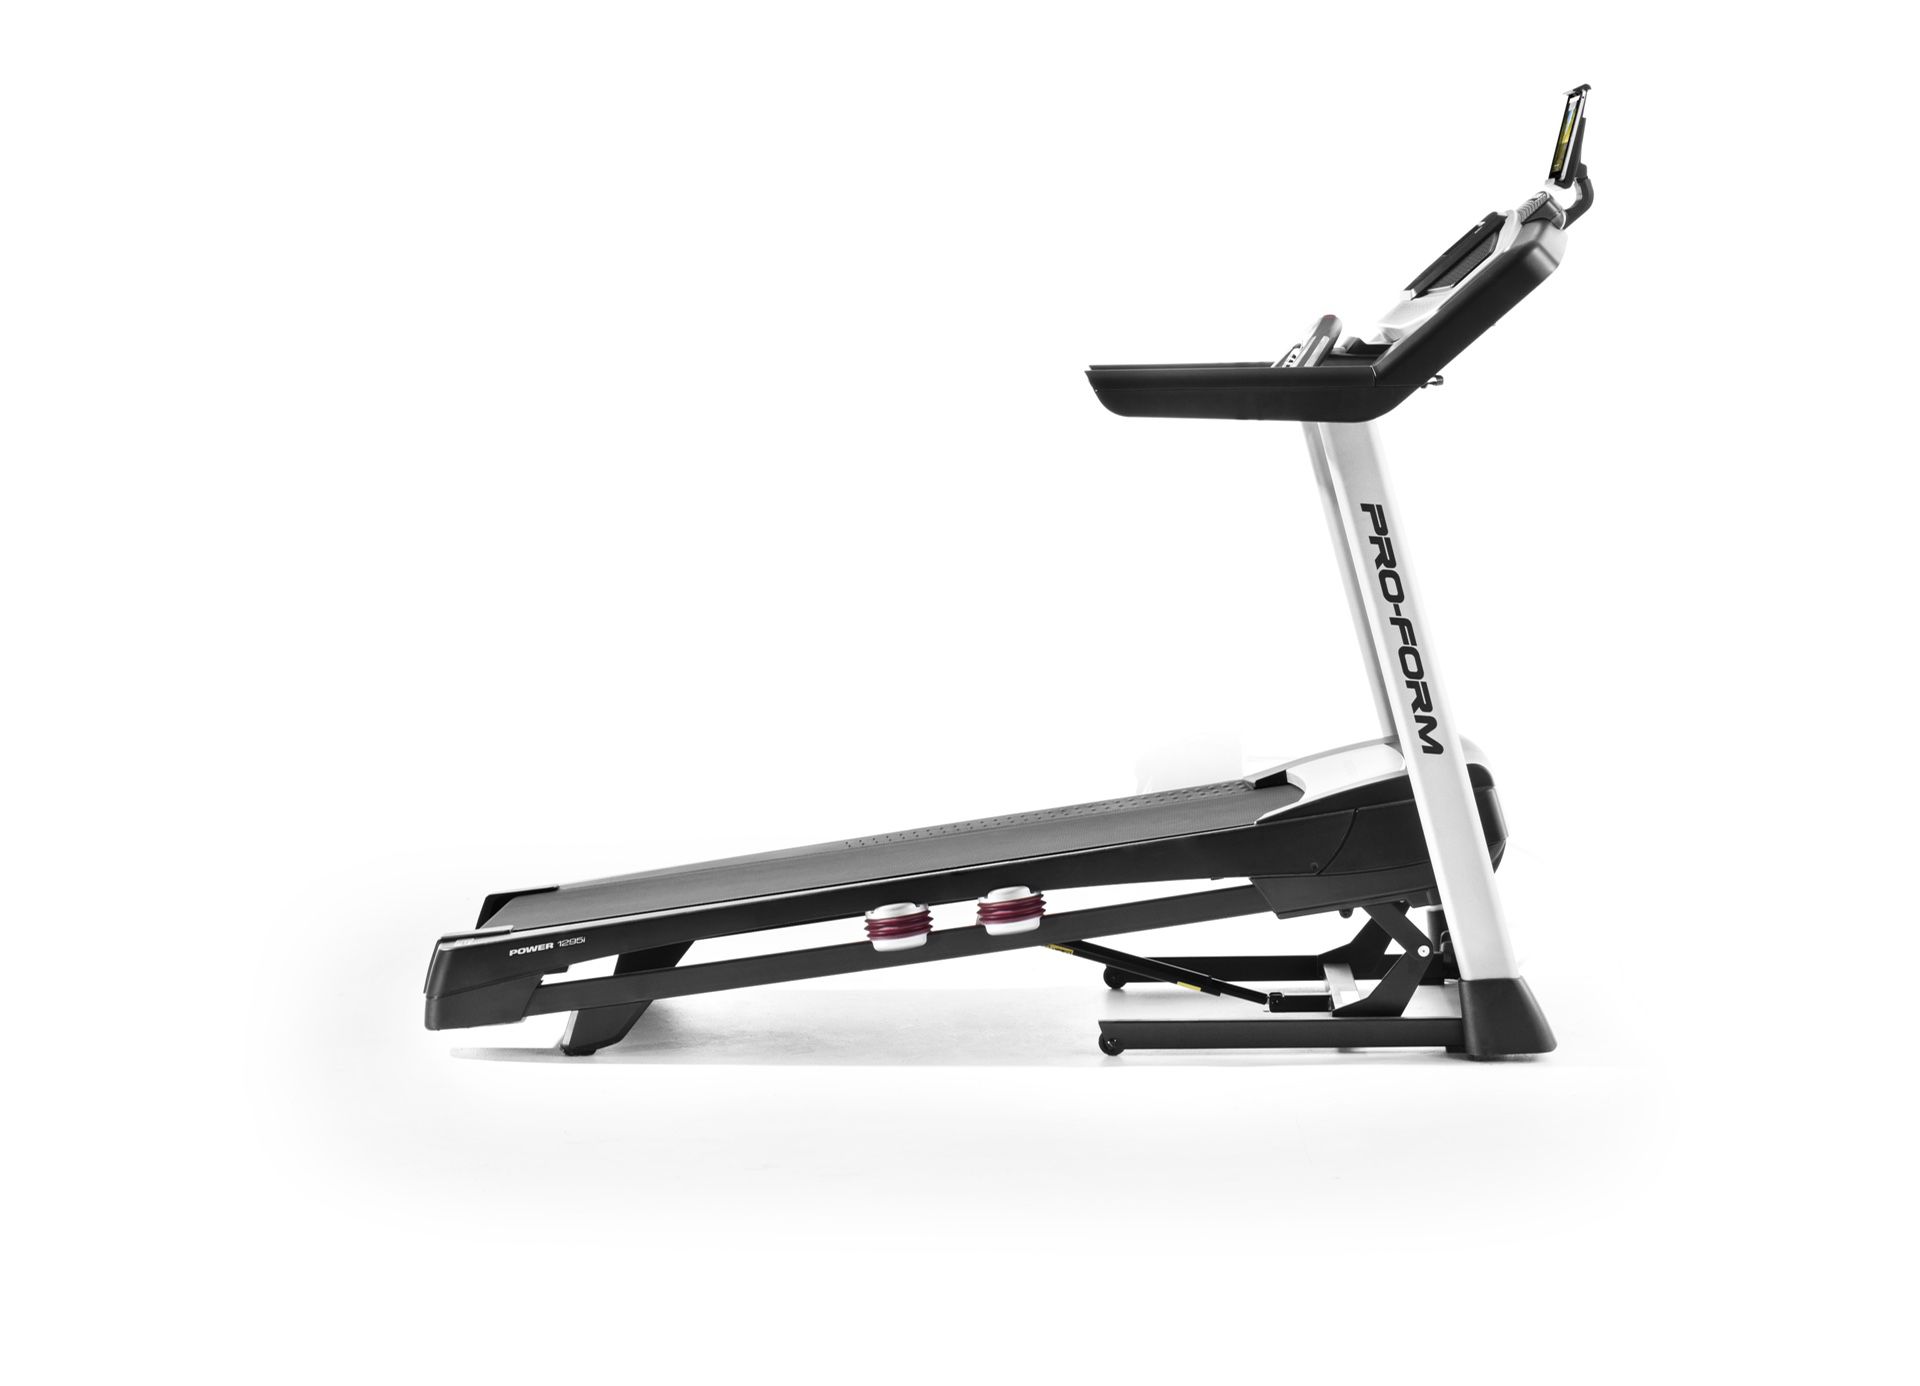 ProForm Power 1295i Treadmill. PFTL11716 Retails for $1,400. Only $850+ tax